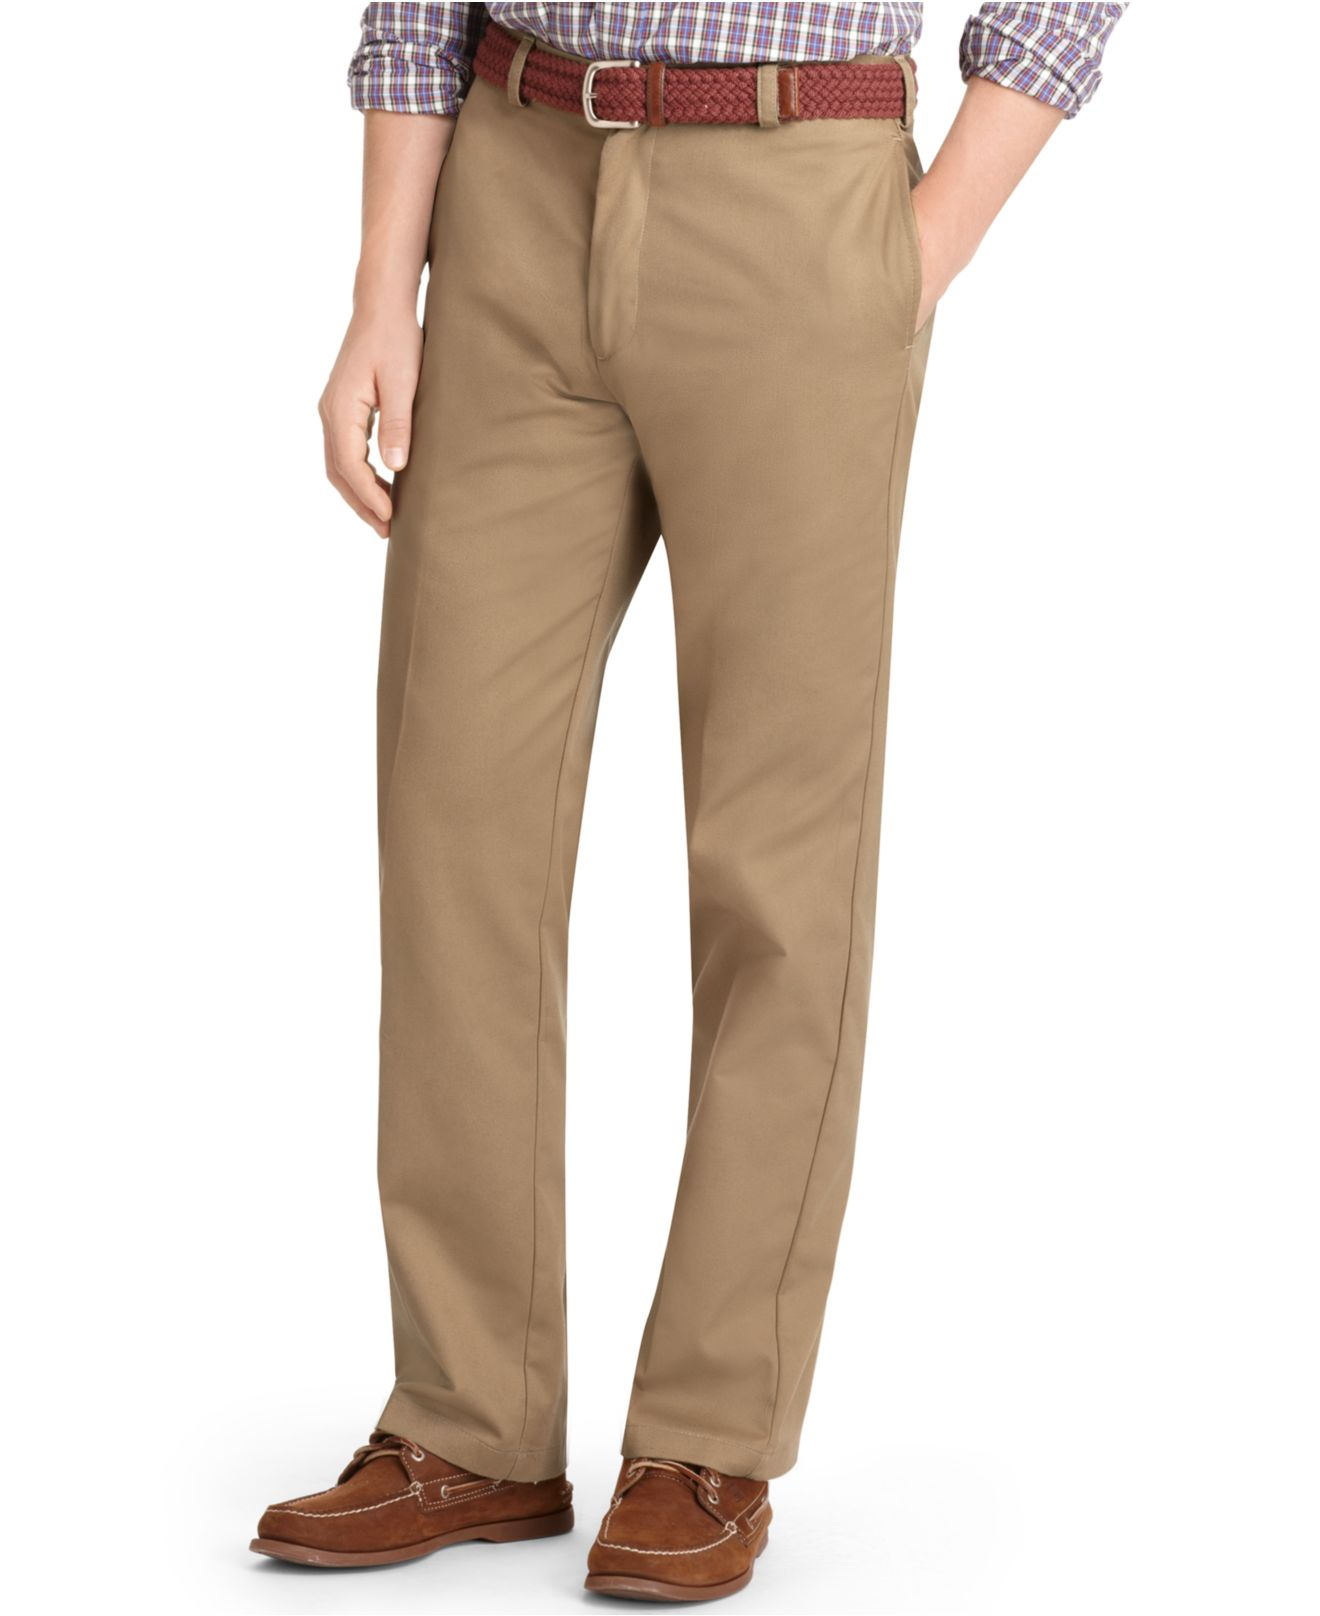 Izod American Classic Fit Wrinkle Free Flat Front Chino Pants In Natural For Men English Khaki